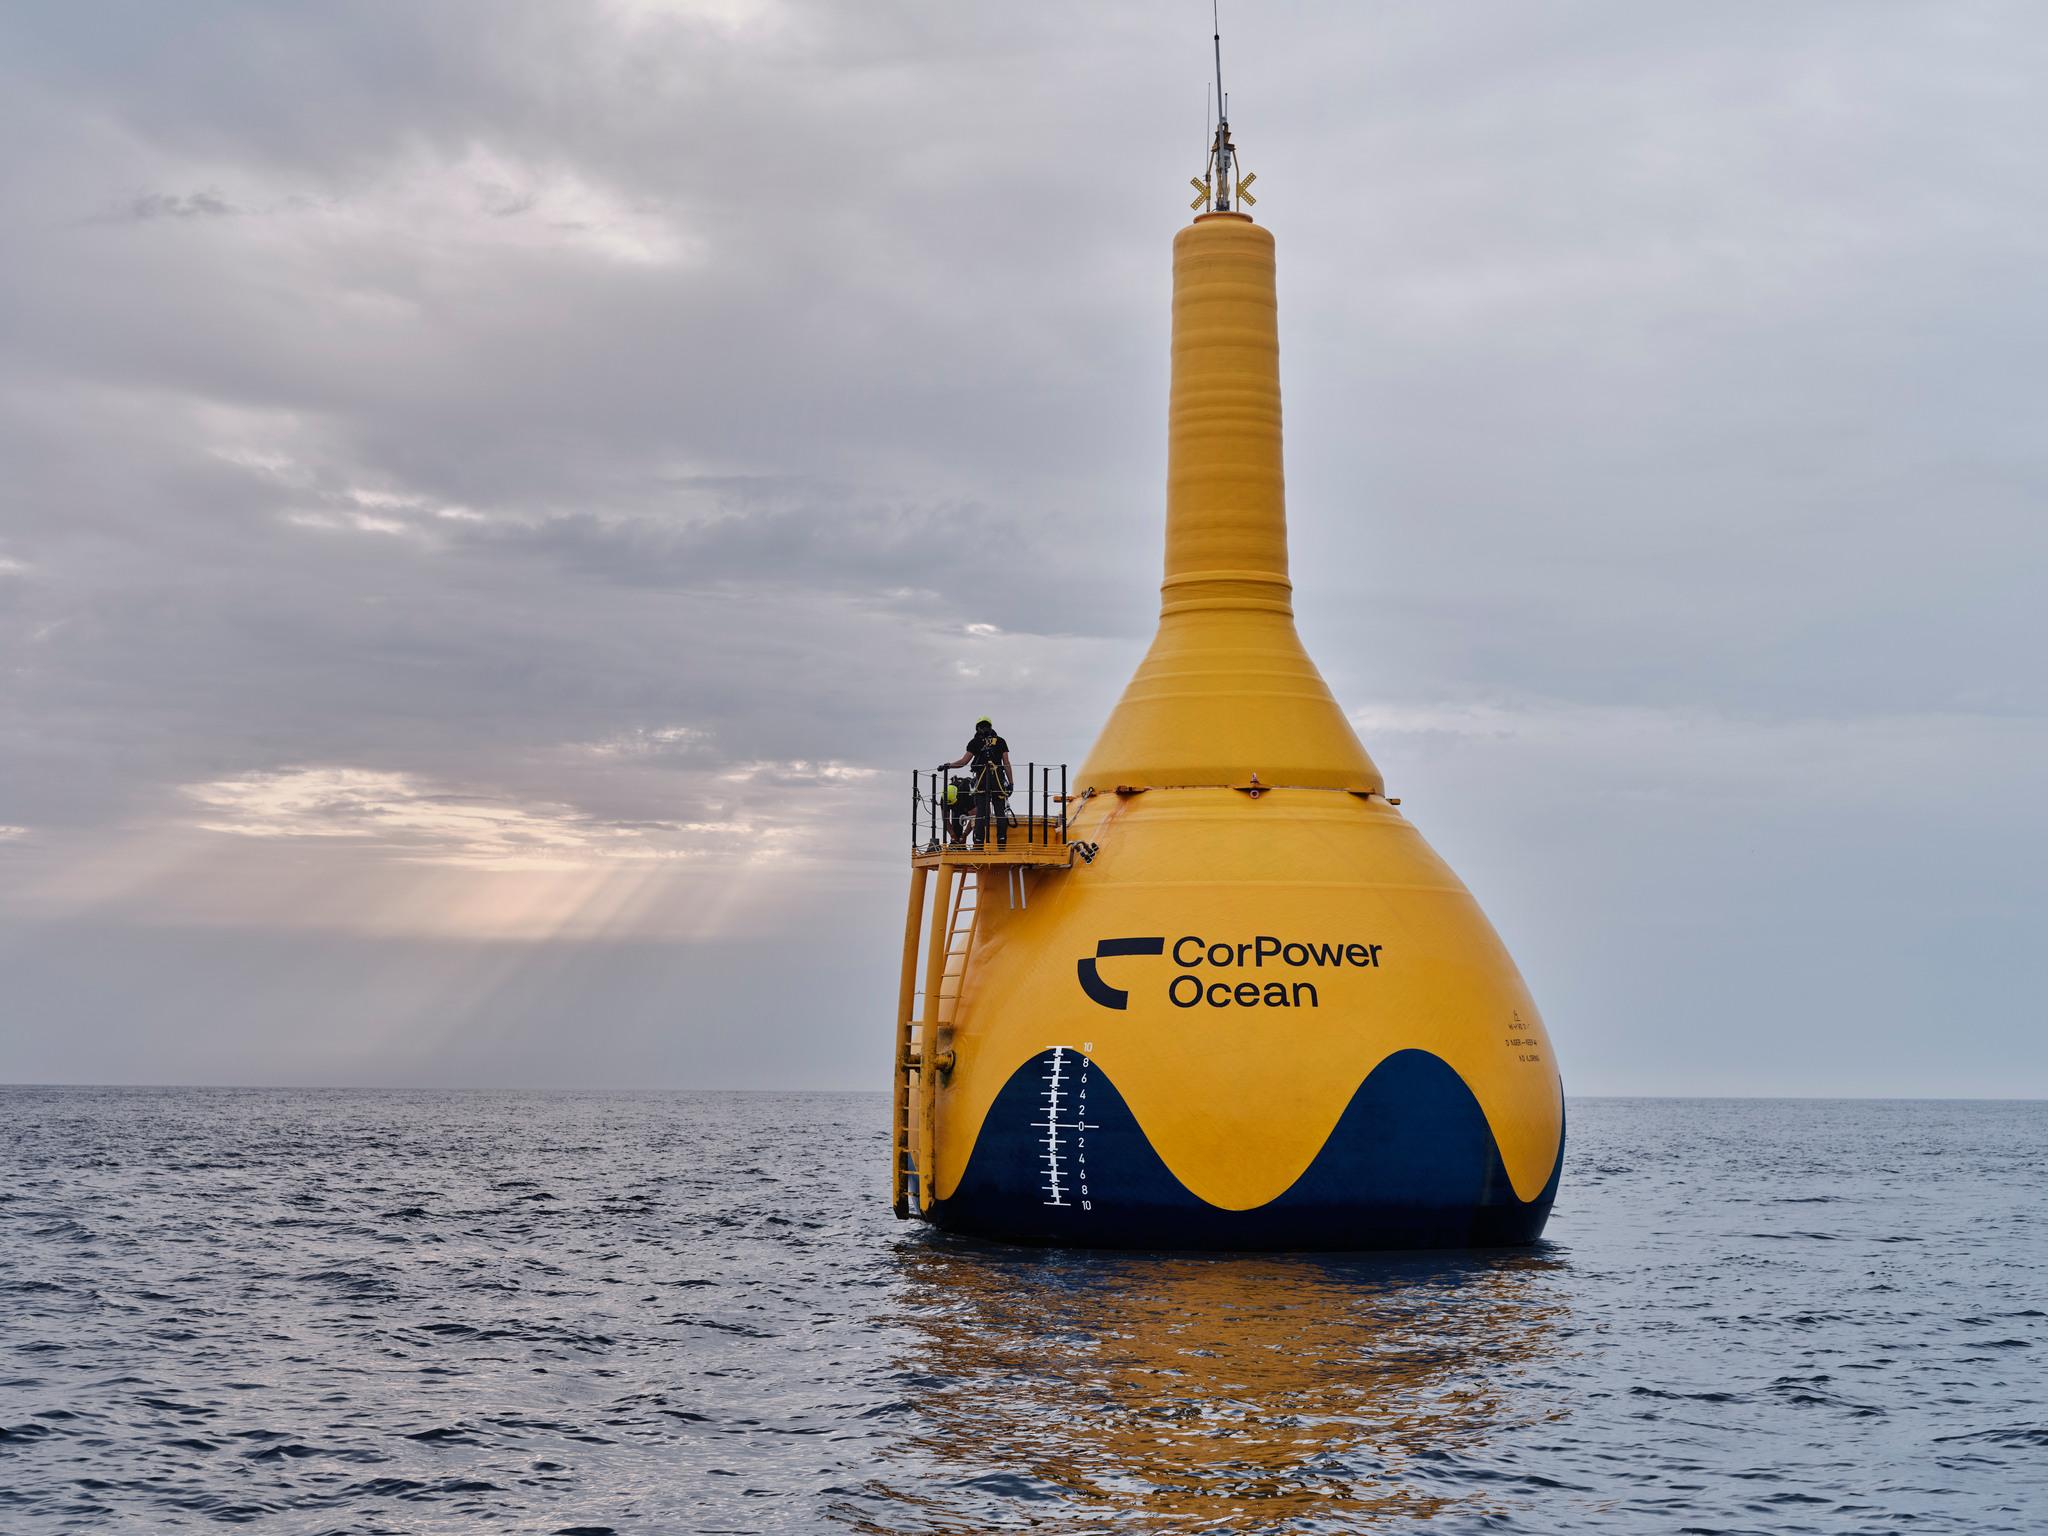 A large, yellow, buoy-shaped object in the water, with a person standing on a platform on its left.